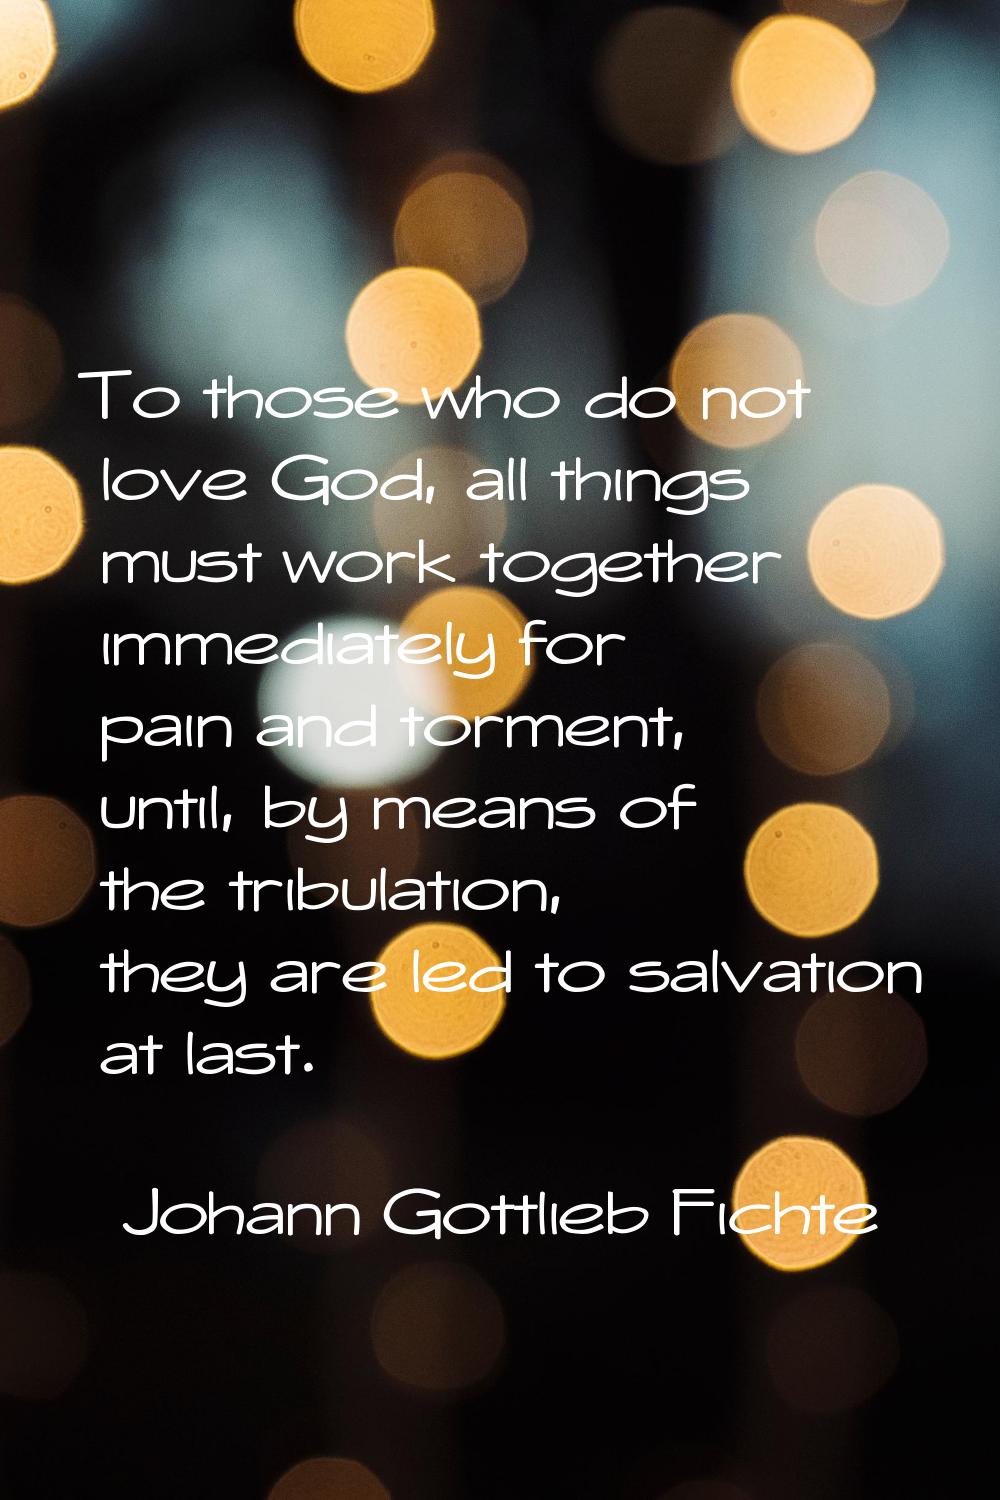 To those who do not love God, all things must work together immediately for pain and torment, until